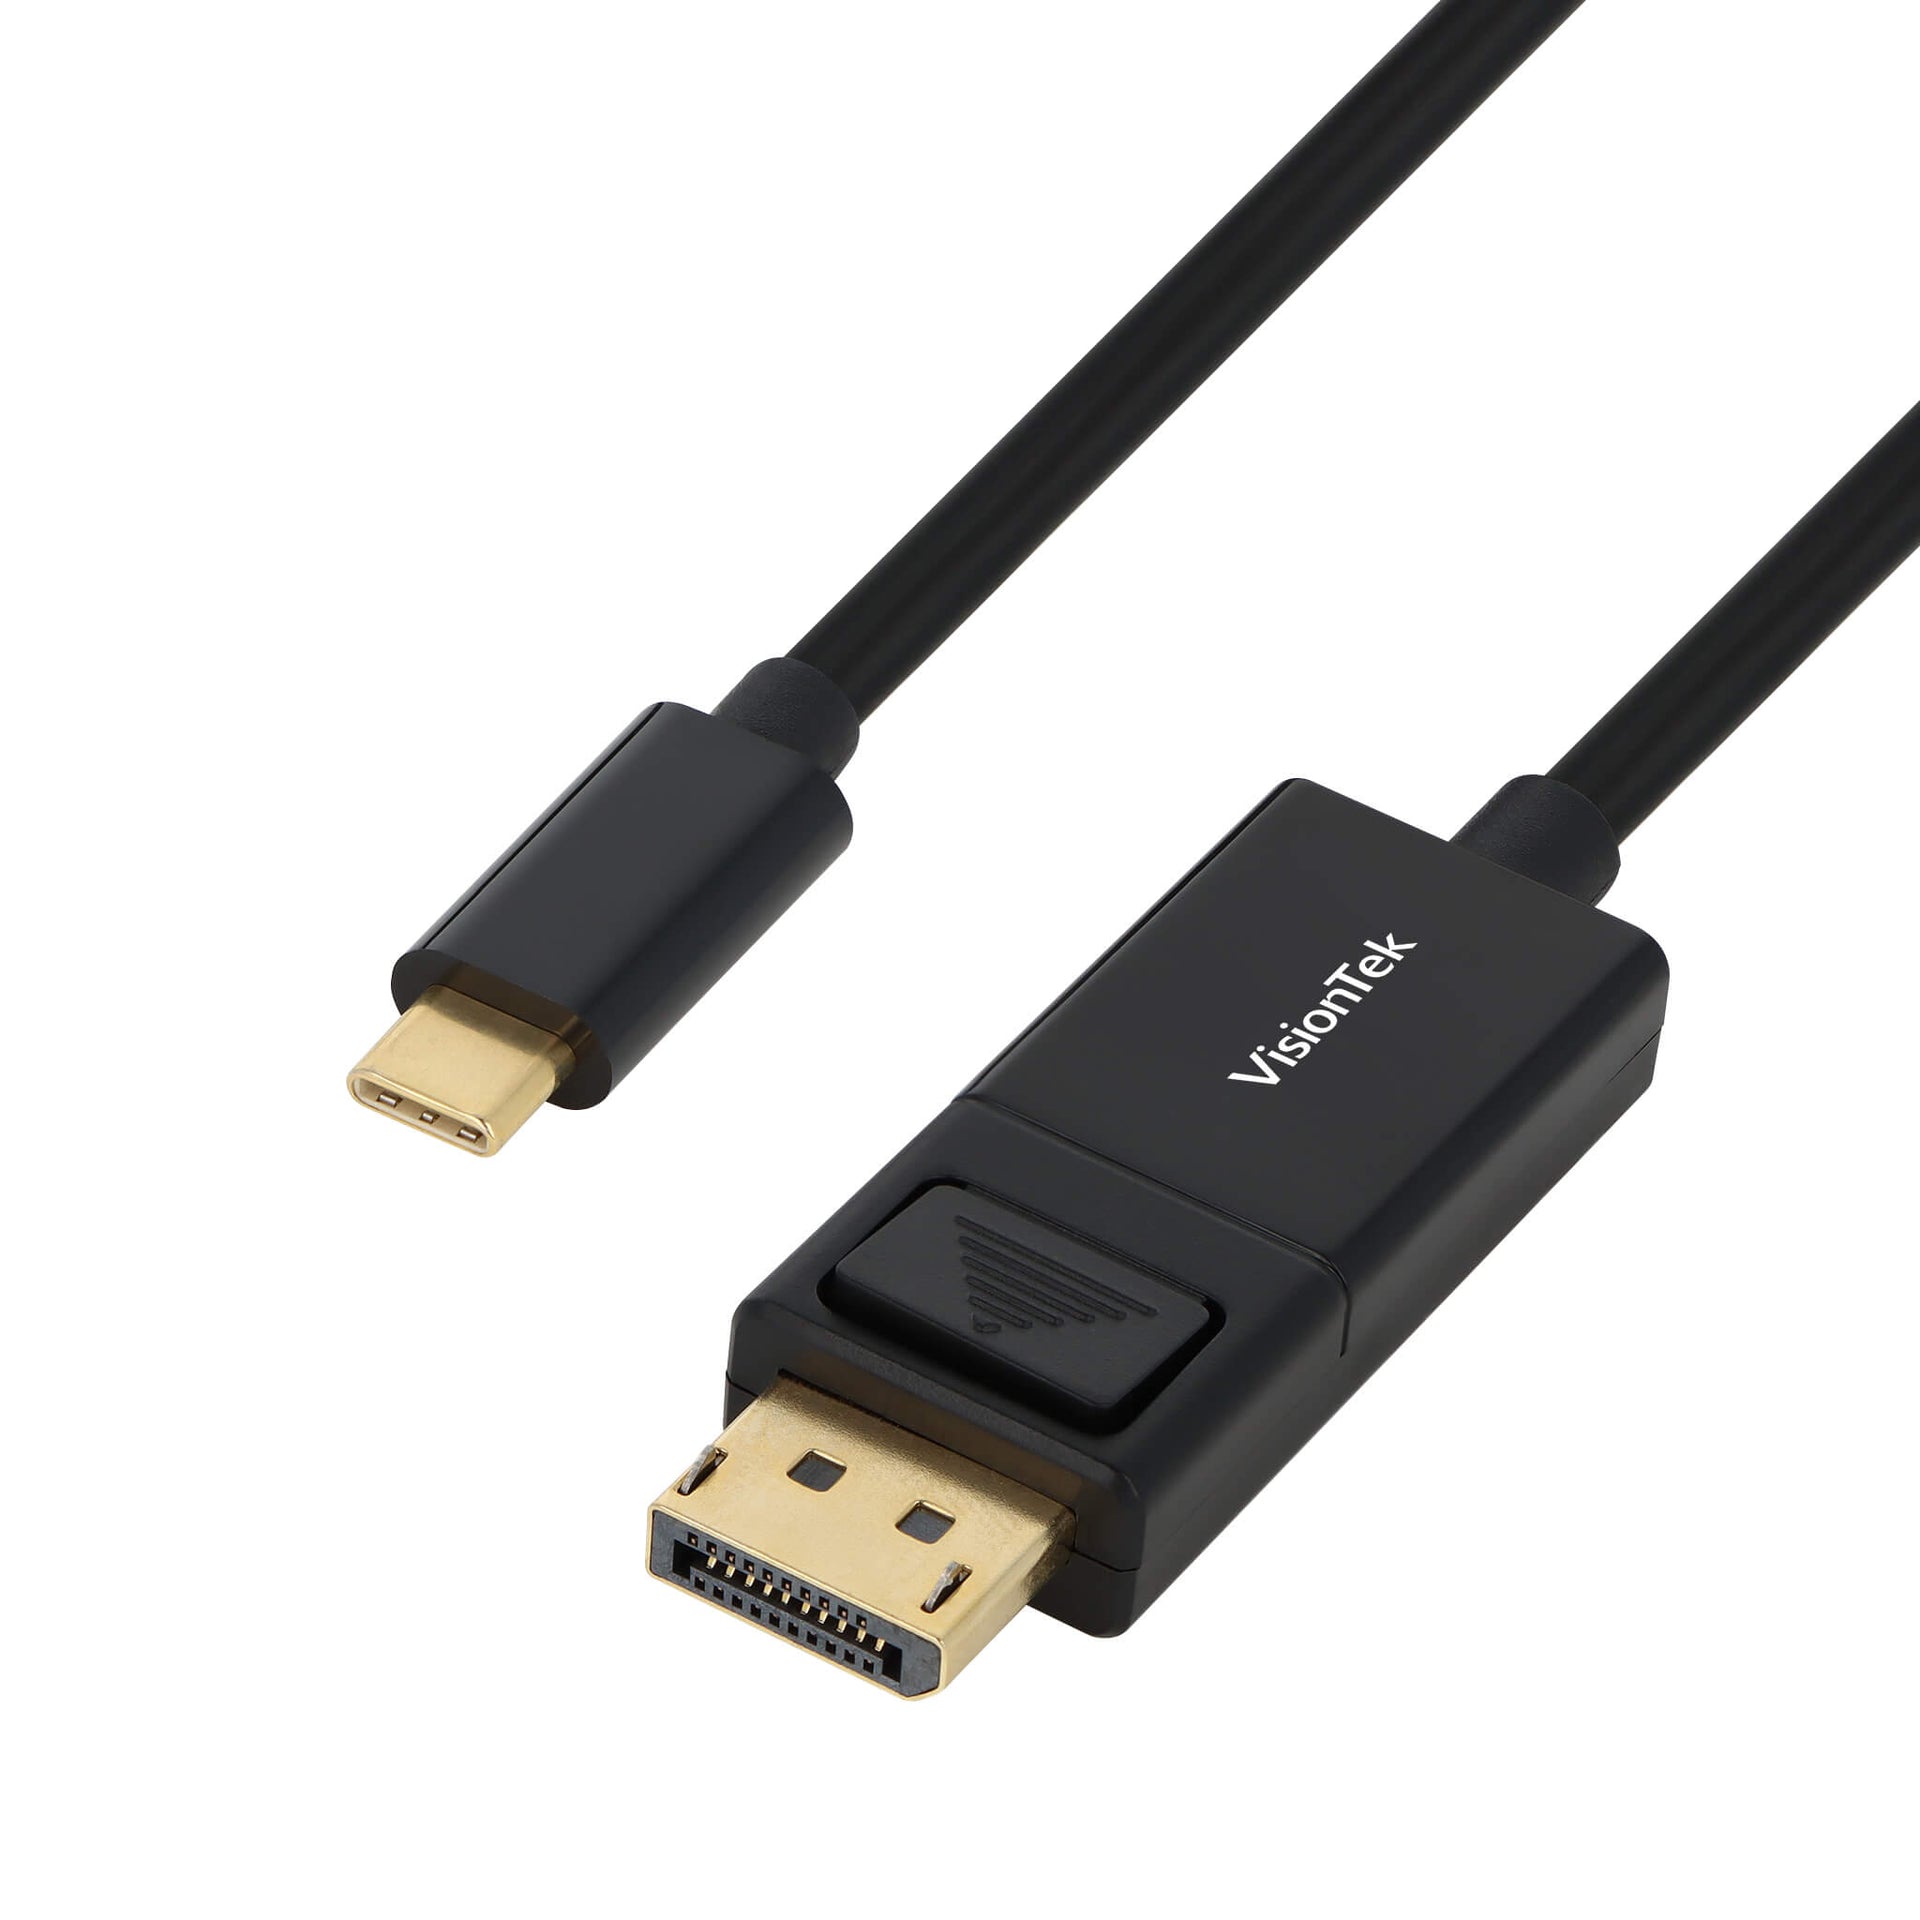 DisplayPort 1.4 to HDMI 2.0 Active Video Adapter Cable - 4K/60Hz -Black